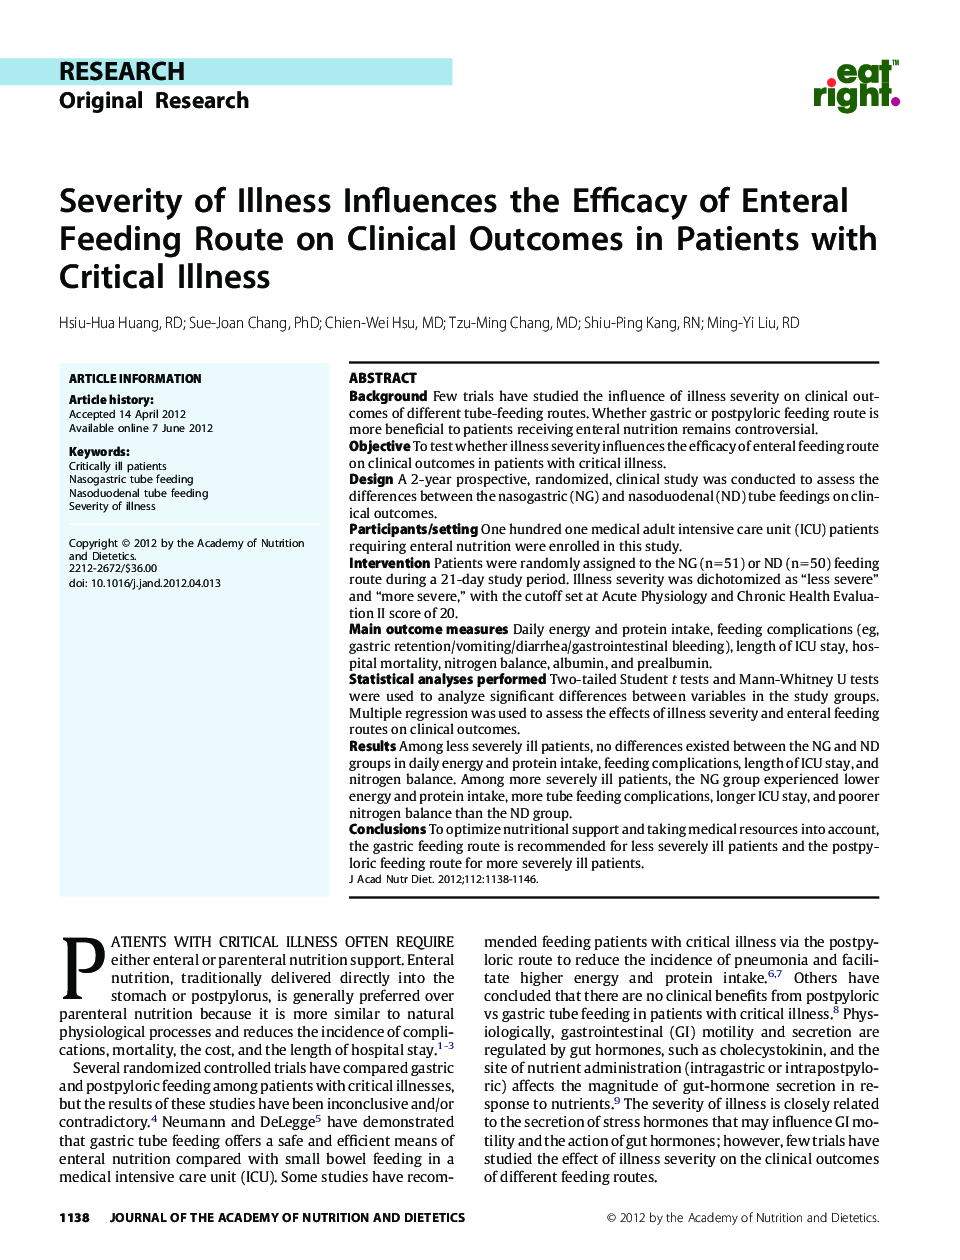 Severity of Illness Influences the Efficacy of Enteral Feeding Route on Clinical Outcomes in Patients with Critical Illness 